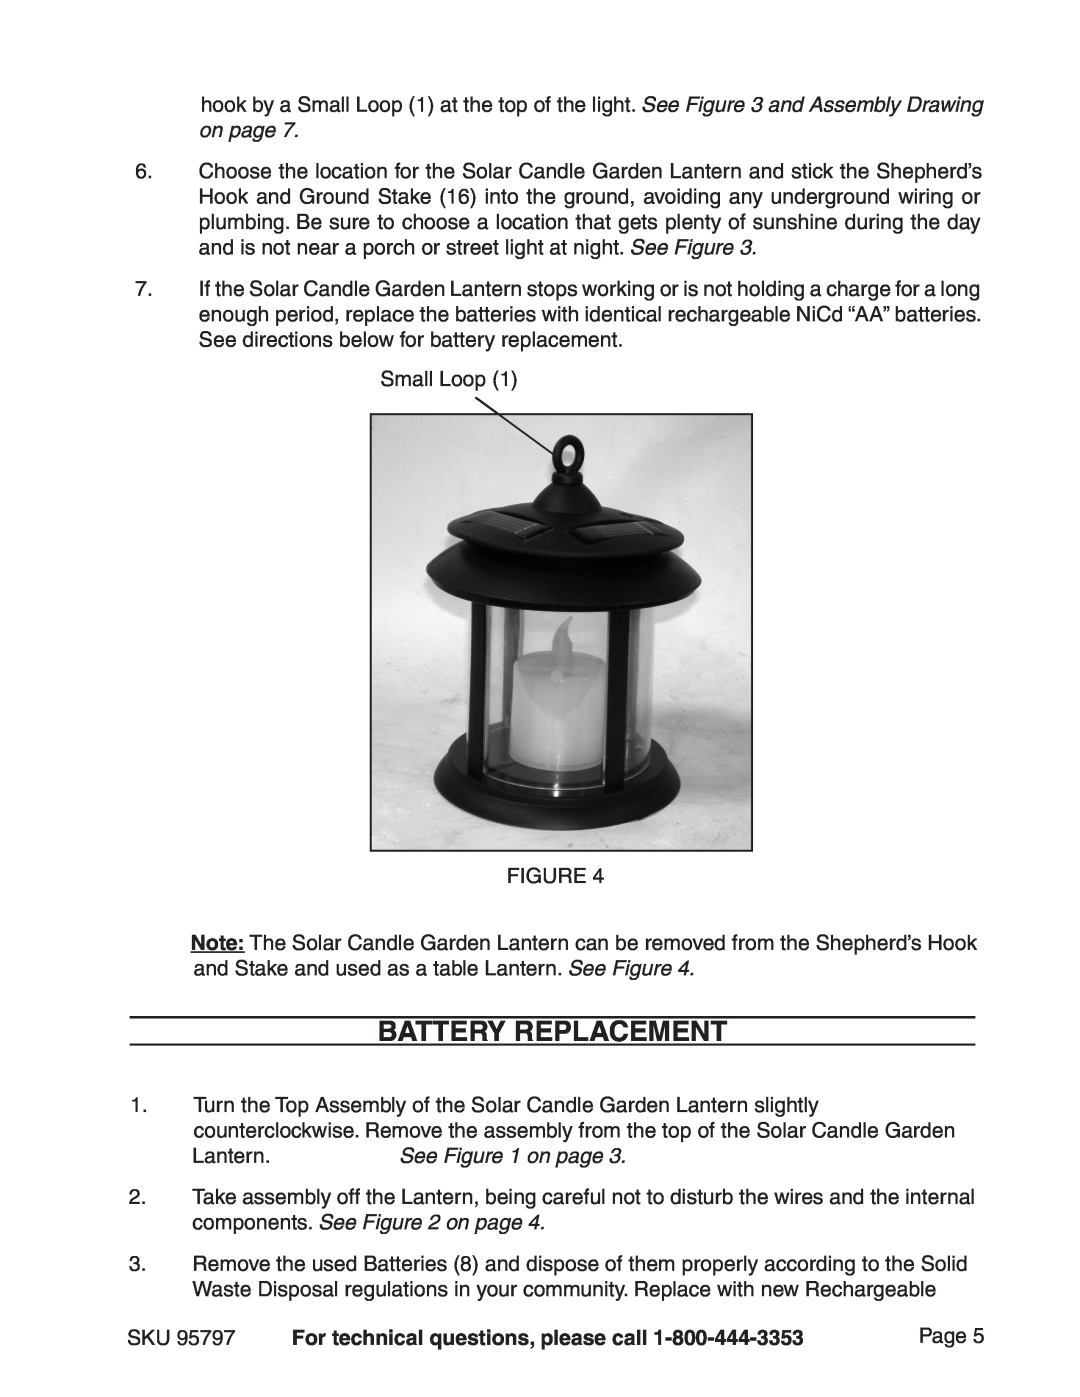 Harbor Freight Tools 95797 manual Battery Replacement, Lantern.See on page, For technical questions, please call 